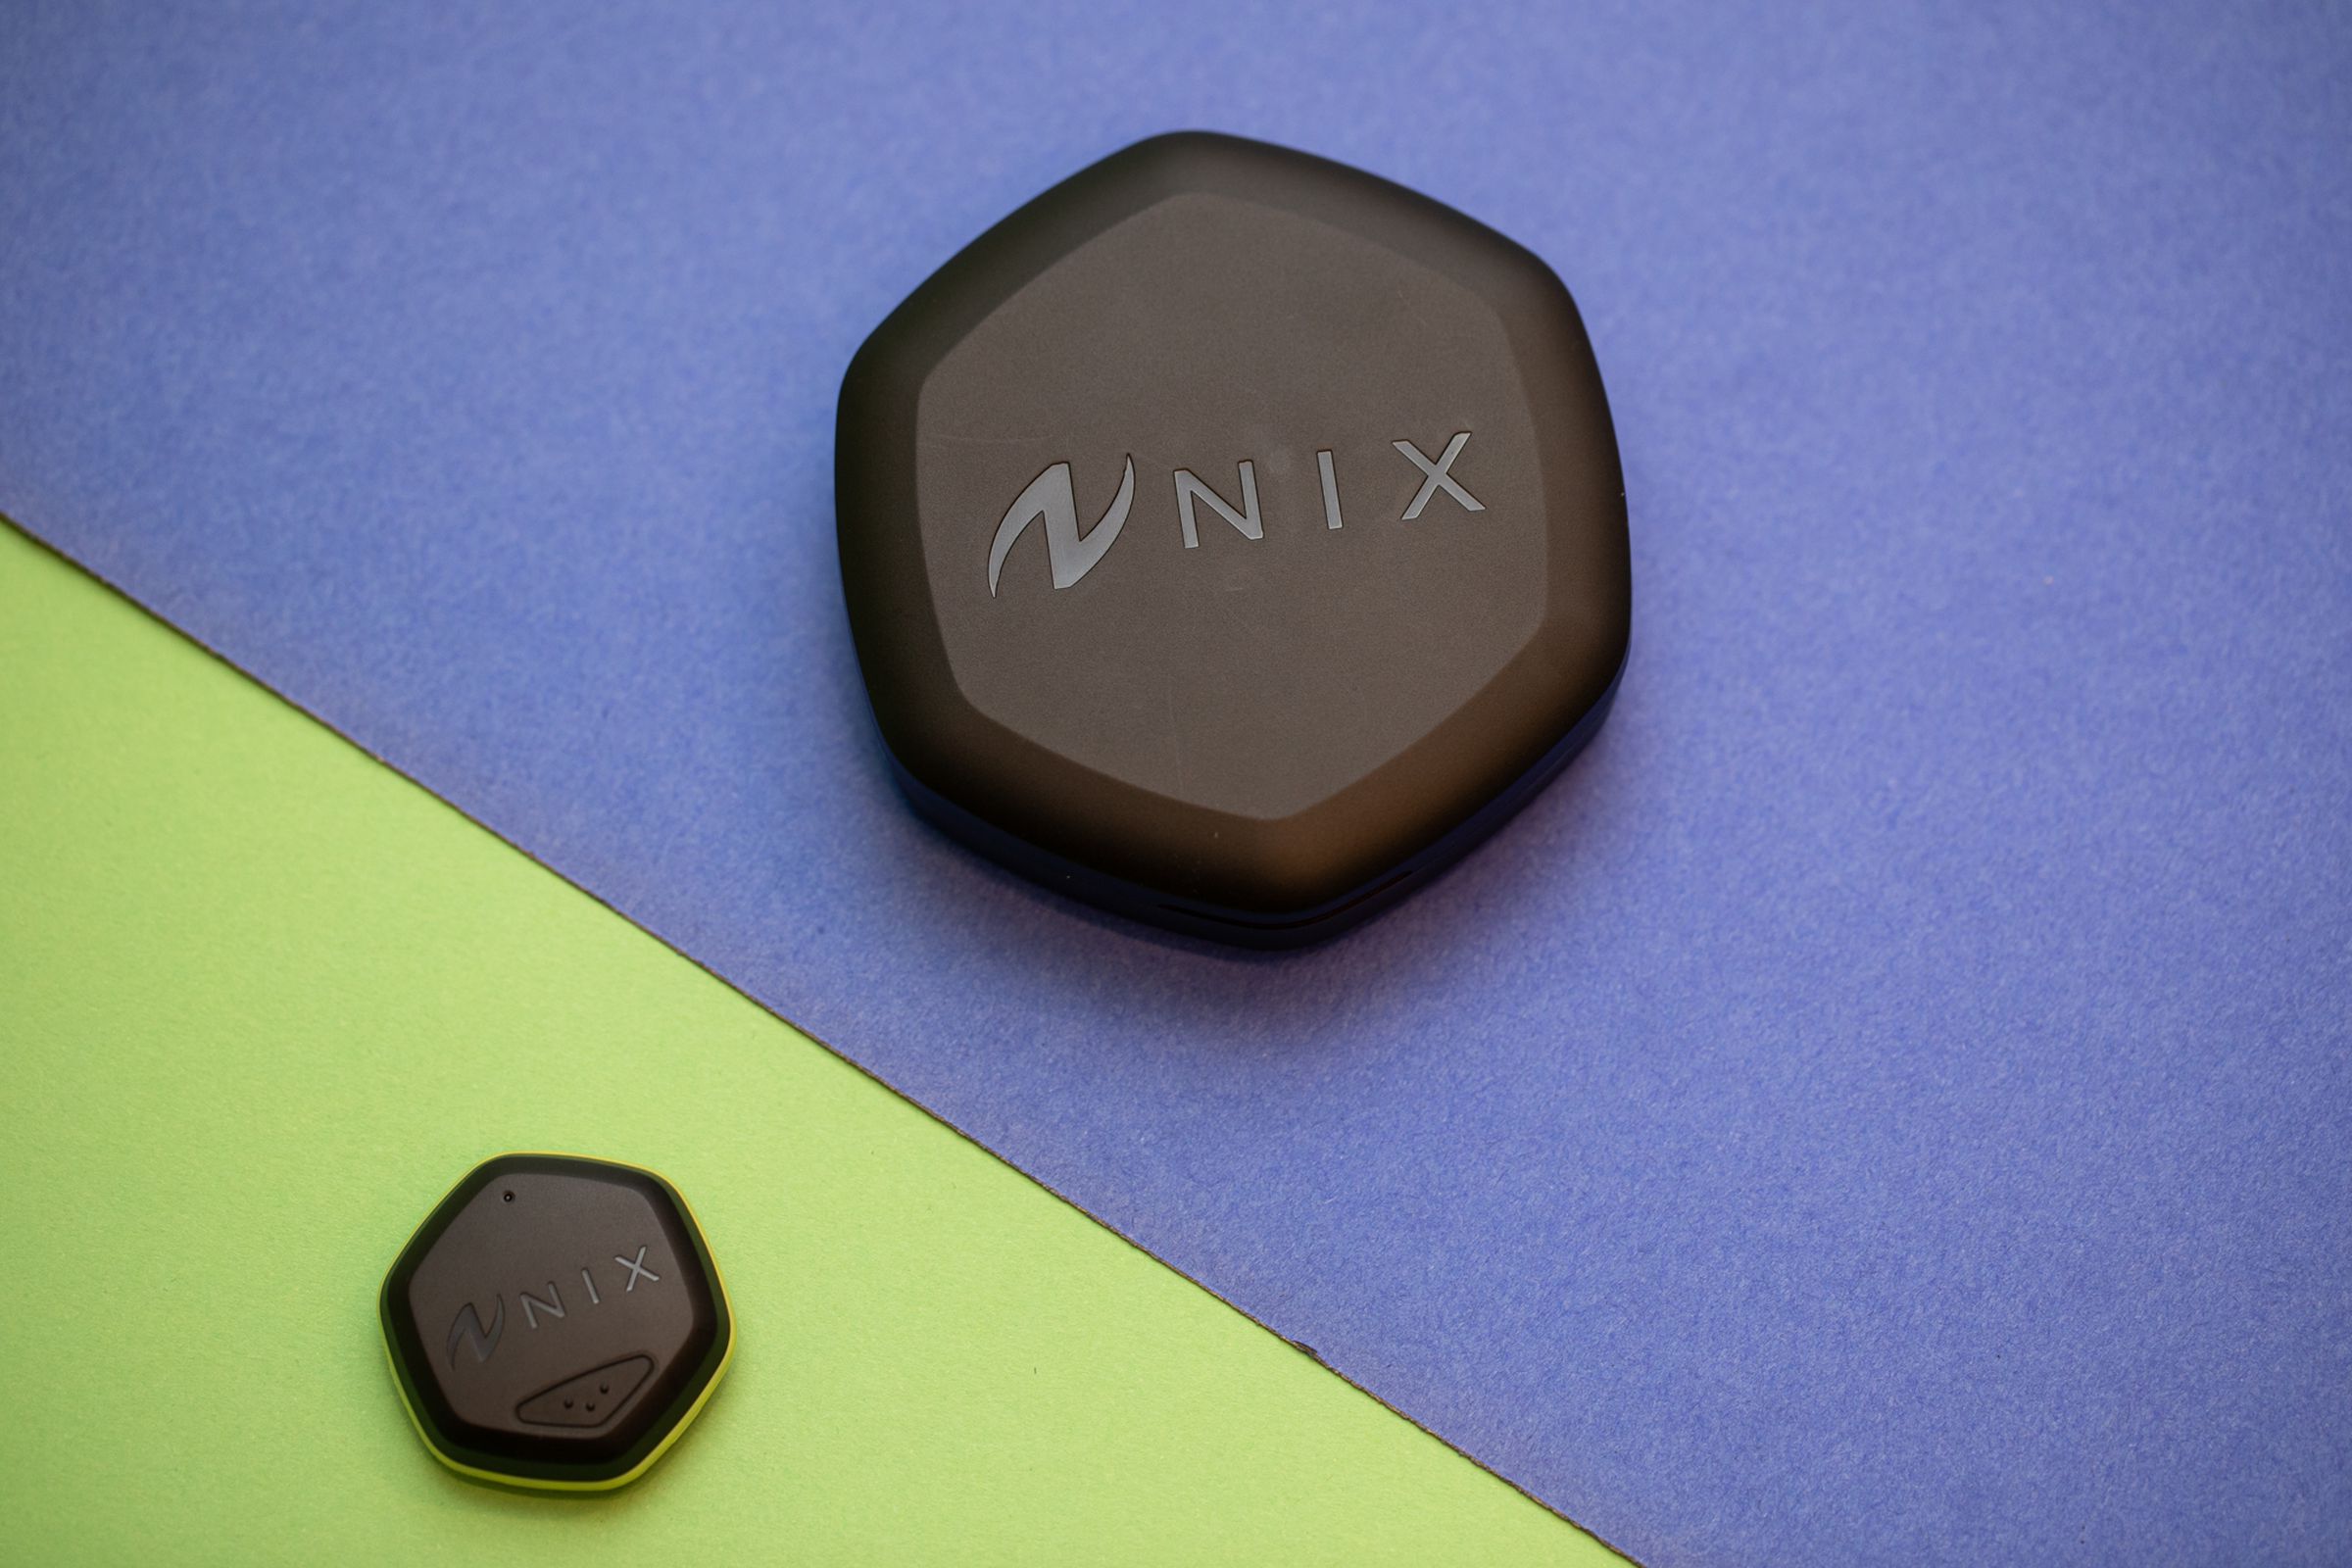 Picture of Nix charging case and sensor pod side by side.